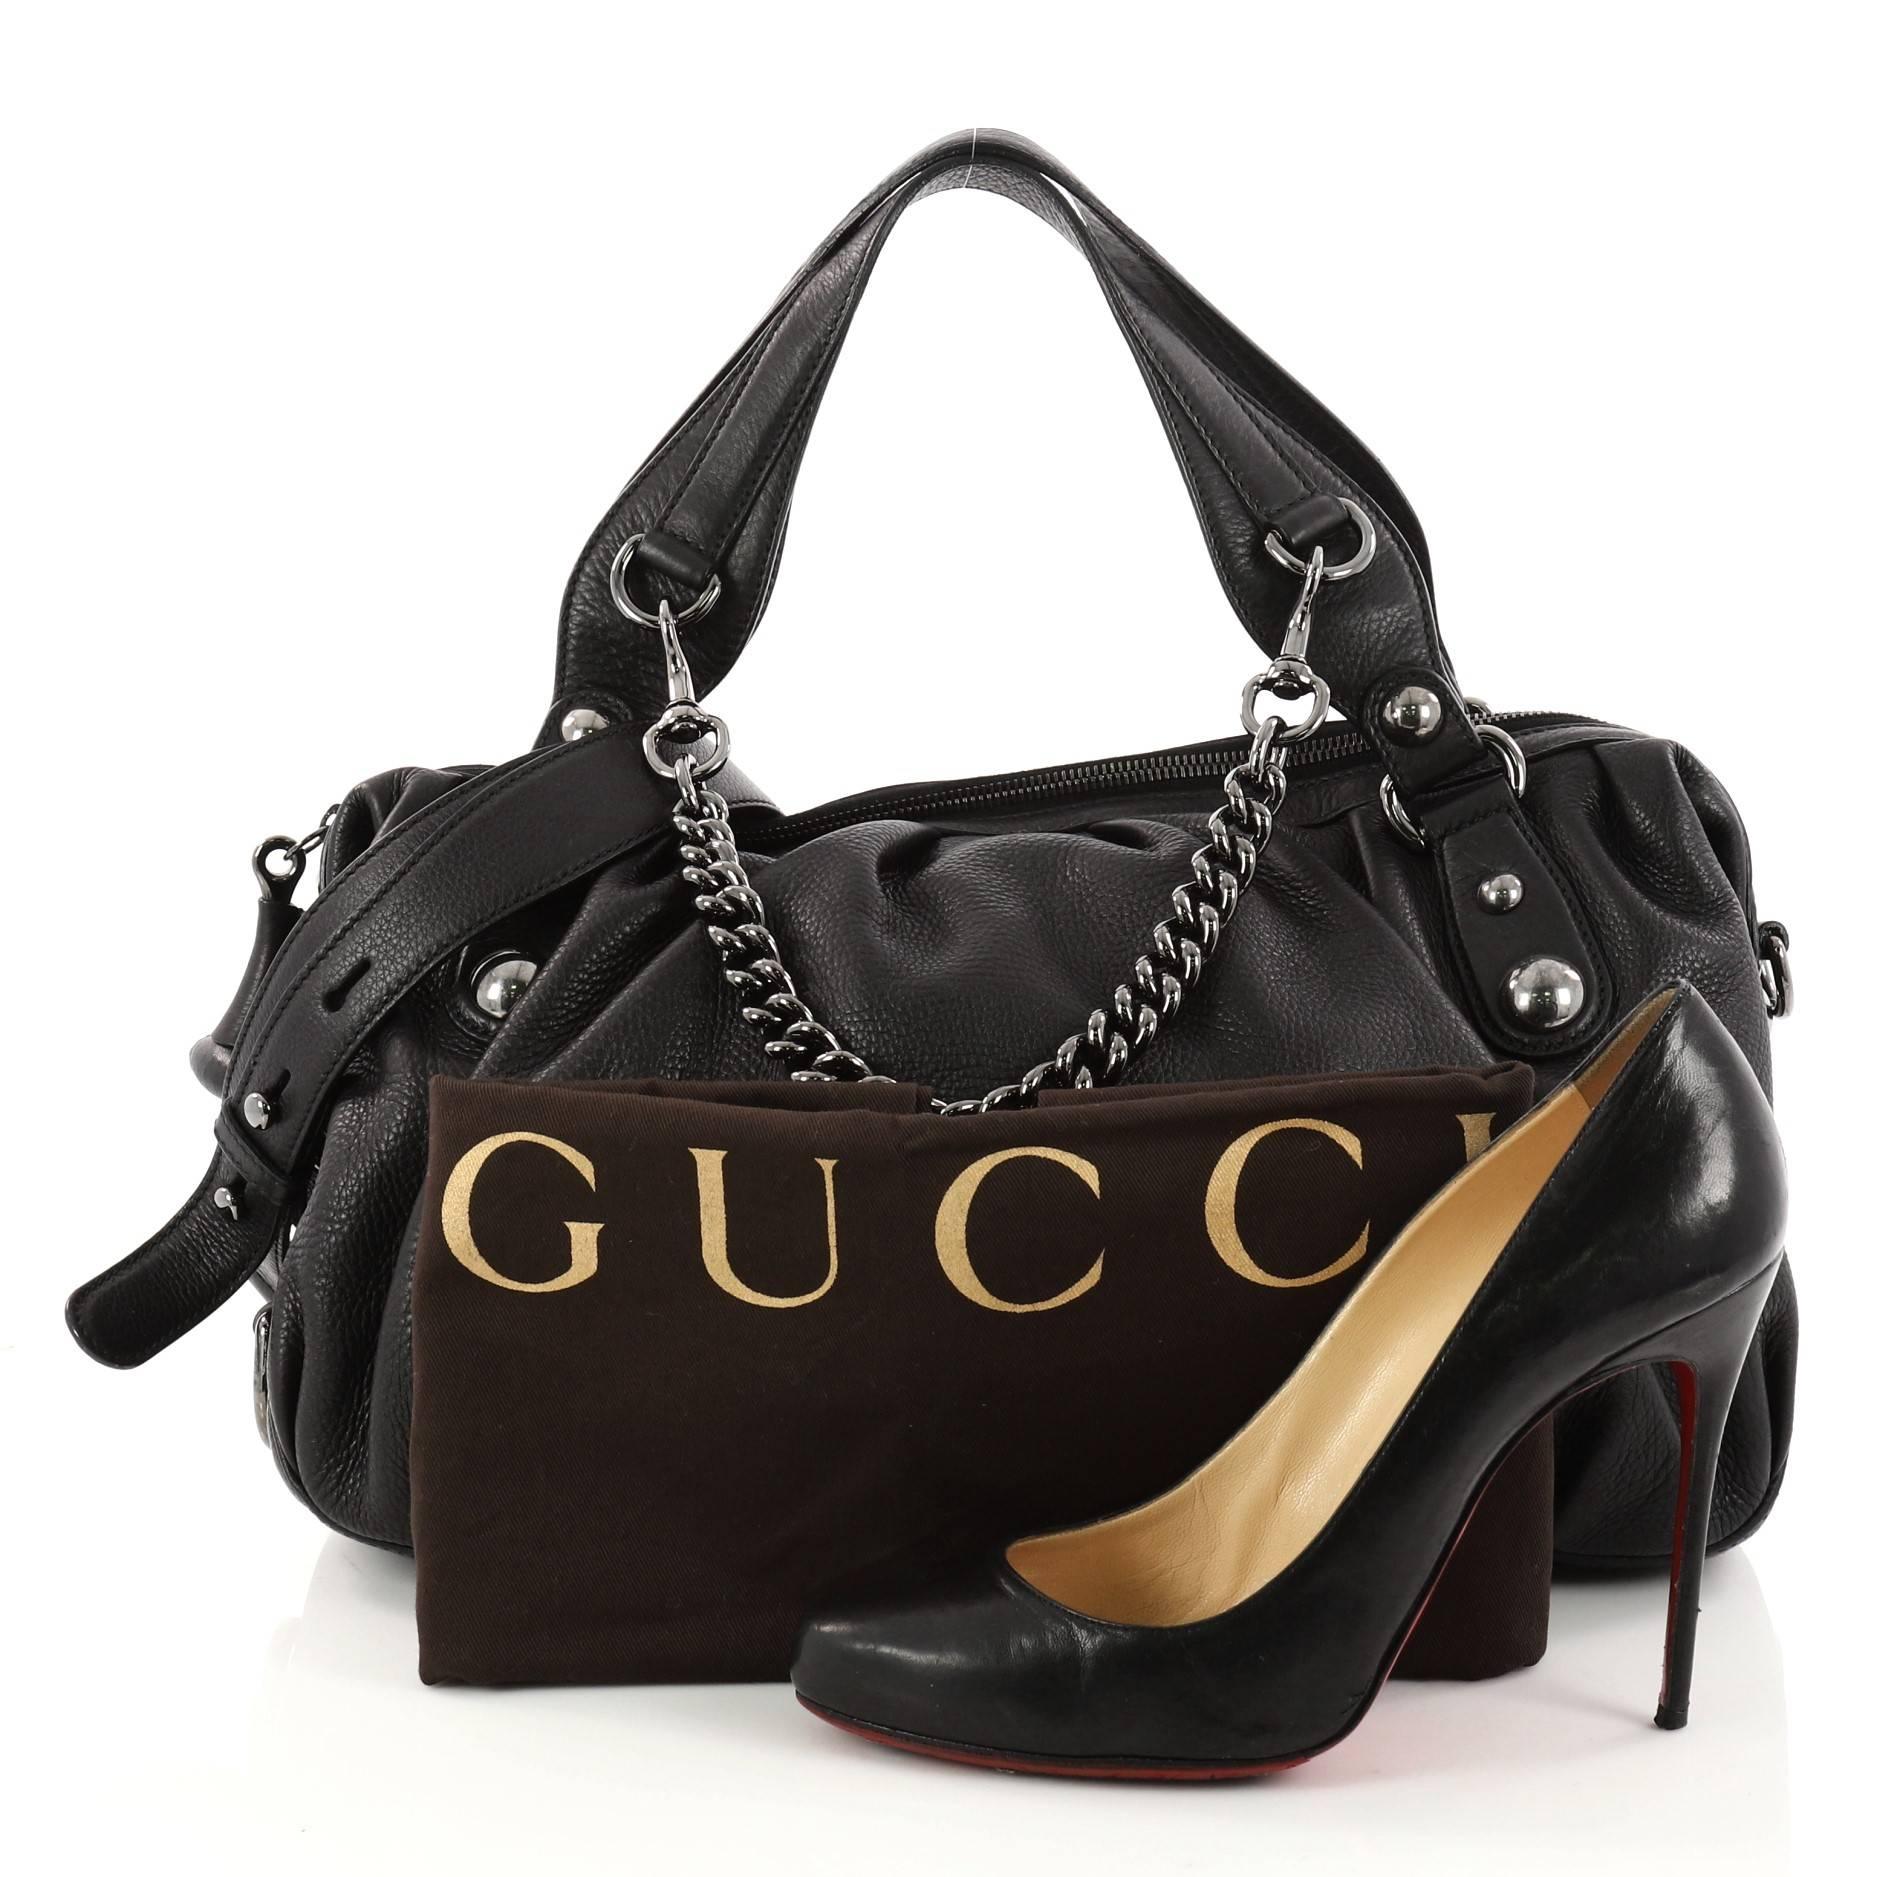 This authentic Gucci Icon Bit Satchel Leather Medium mixes the brand's classic and chic designs with an edgy twist. Crafted in sleek black leather, this rock-chic satchel features a pleated silhouette, dual-top handles, metal horsebit pull tag,